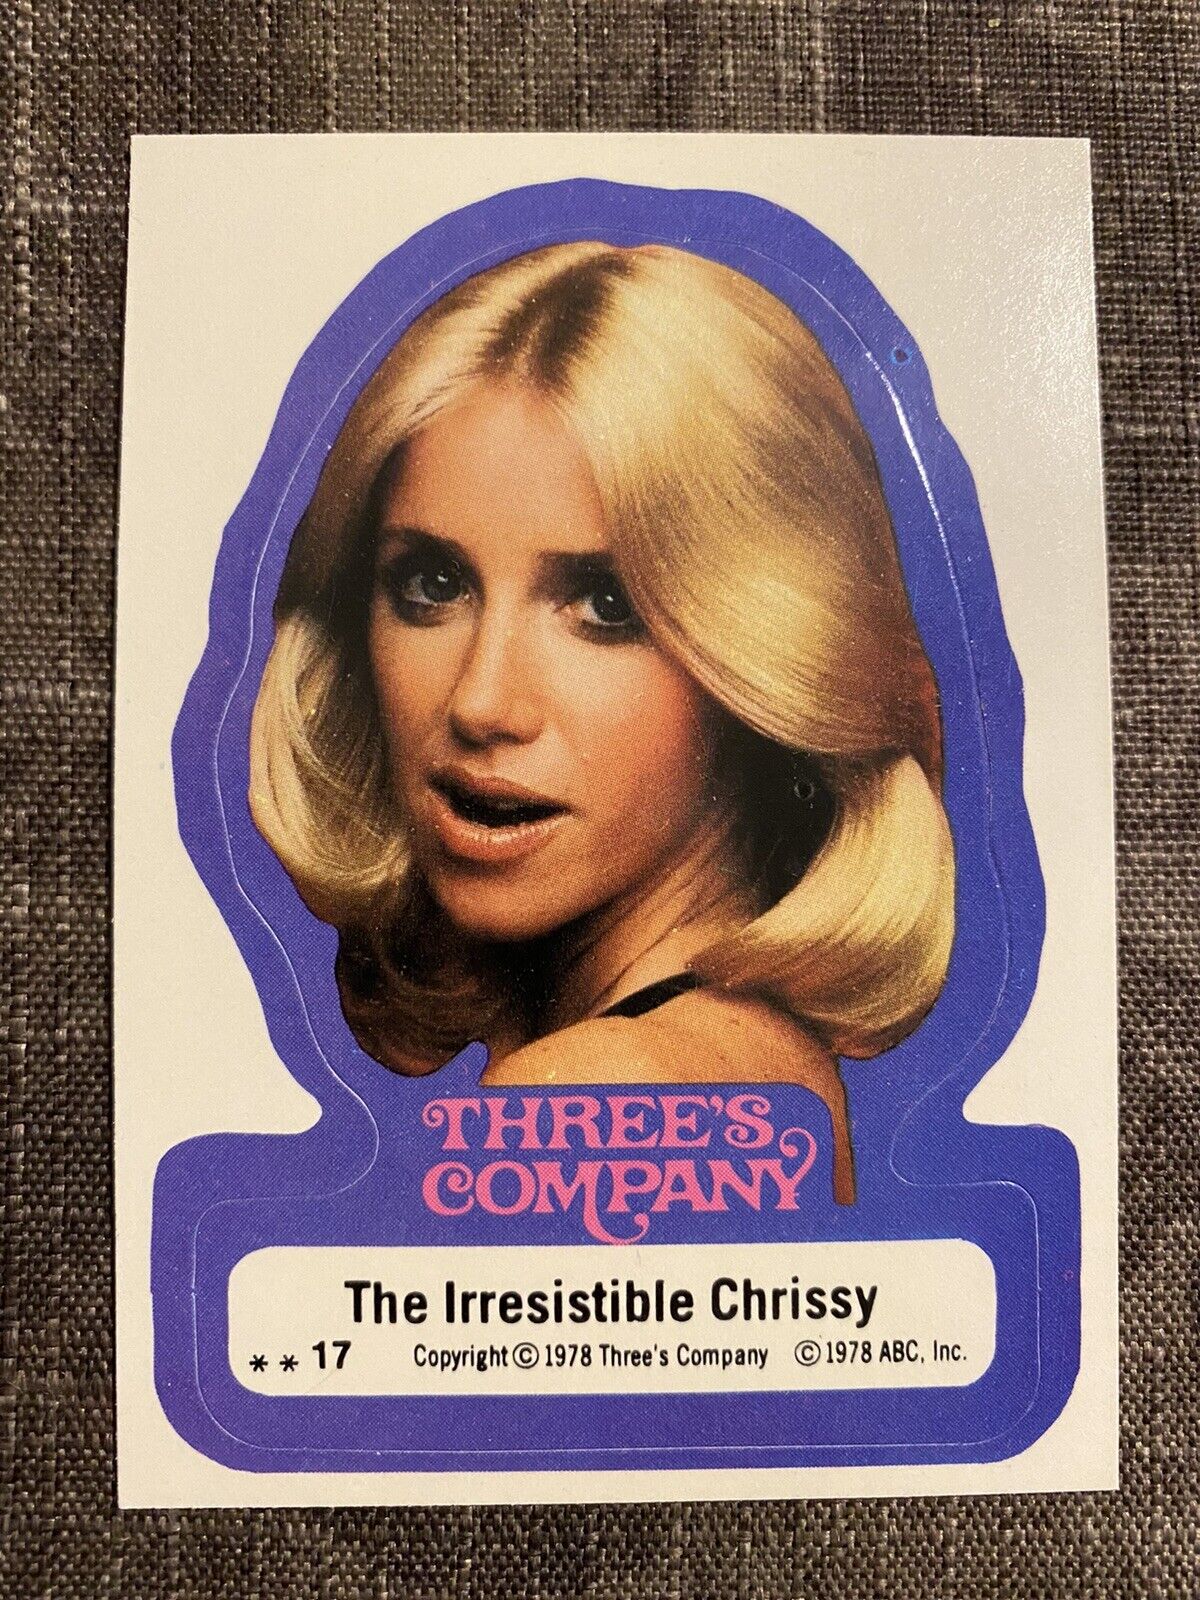 1978 Three's Company #17 The Irresistable Chrissy -Suzanne Somers -BEAUTIFUL